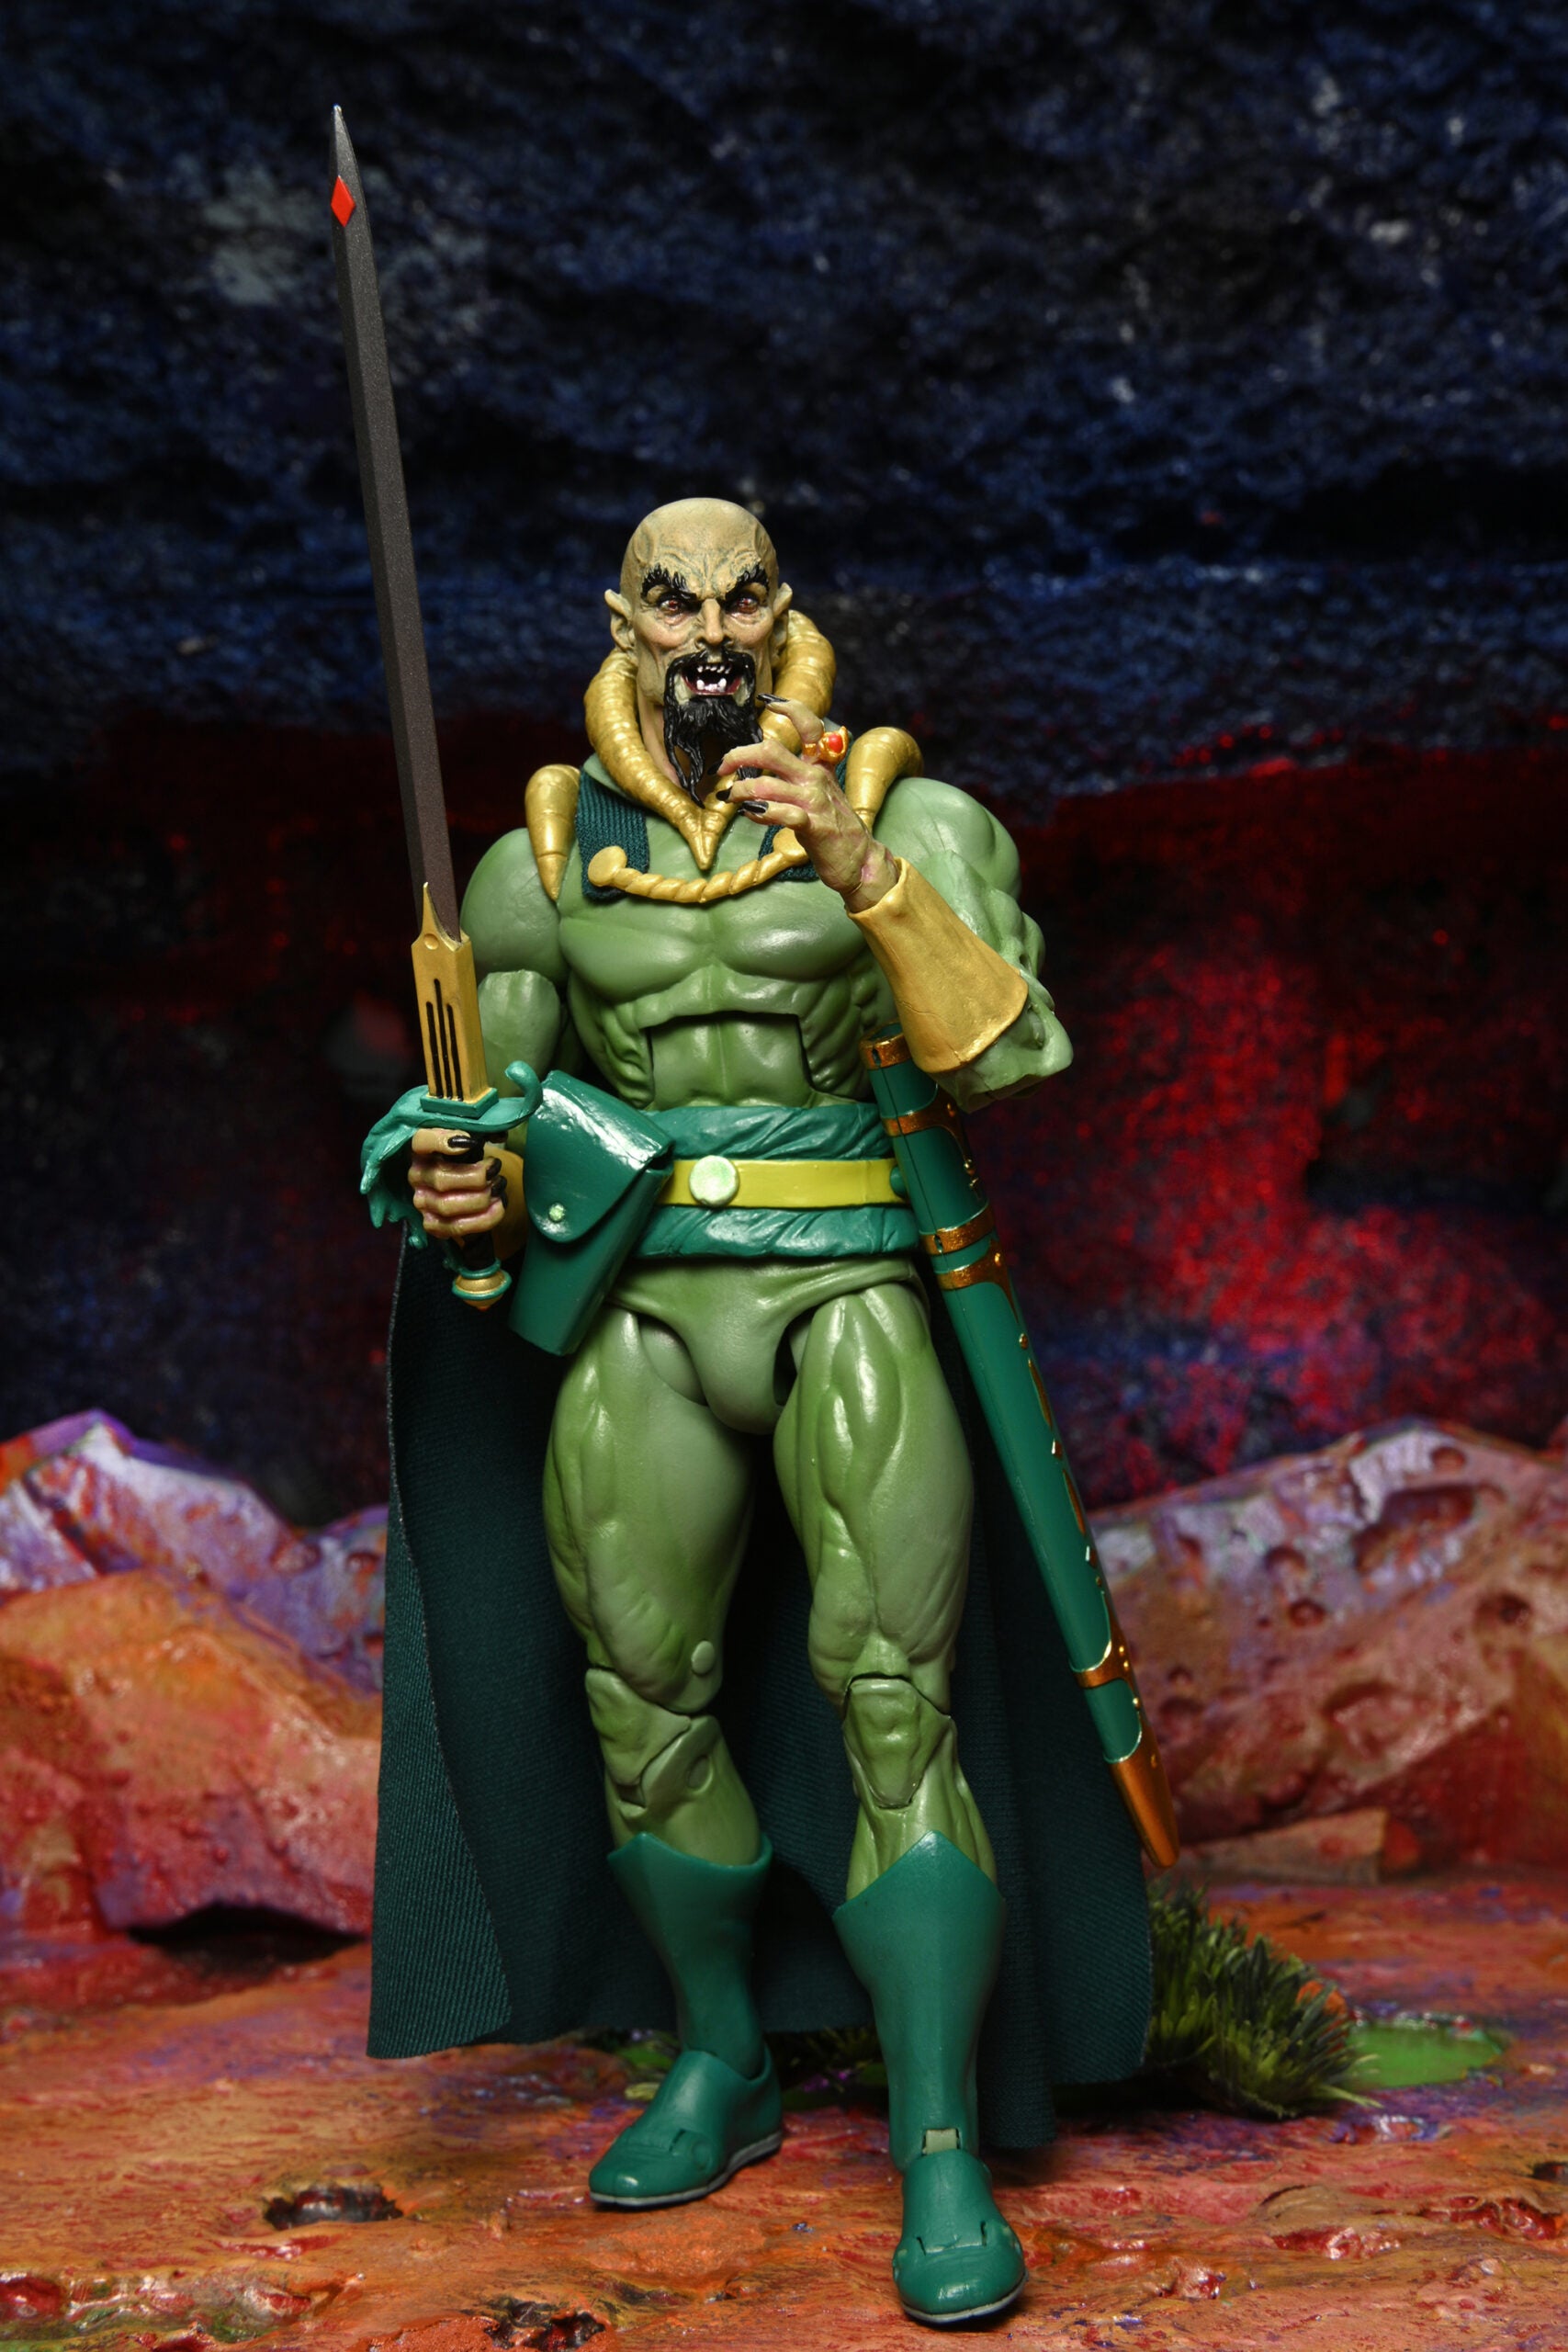 NECA - King Features The Original Superheroes - Ming The Merciless 7" Action Figure